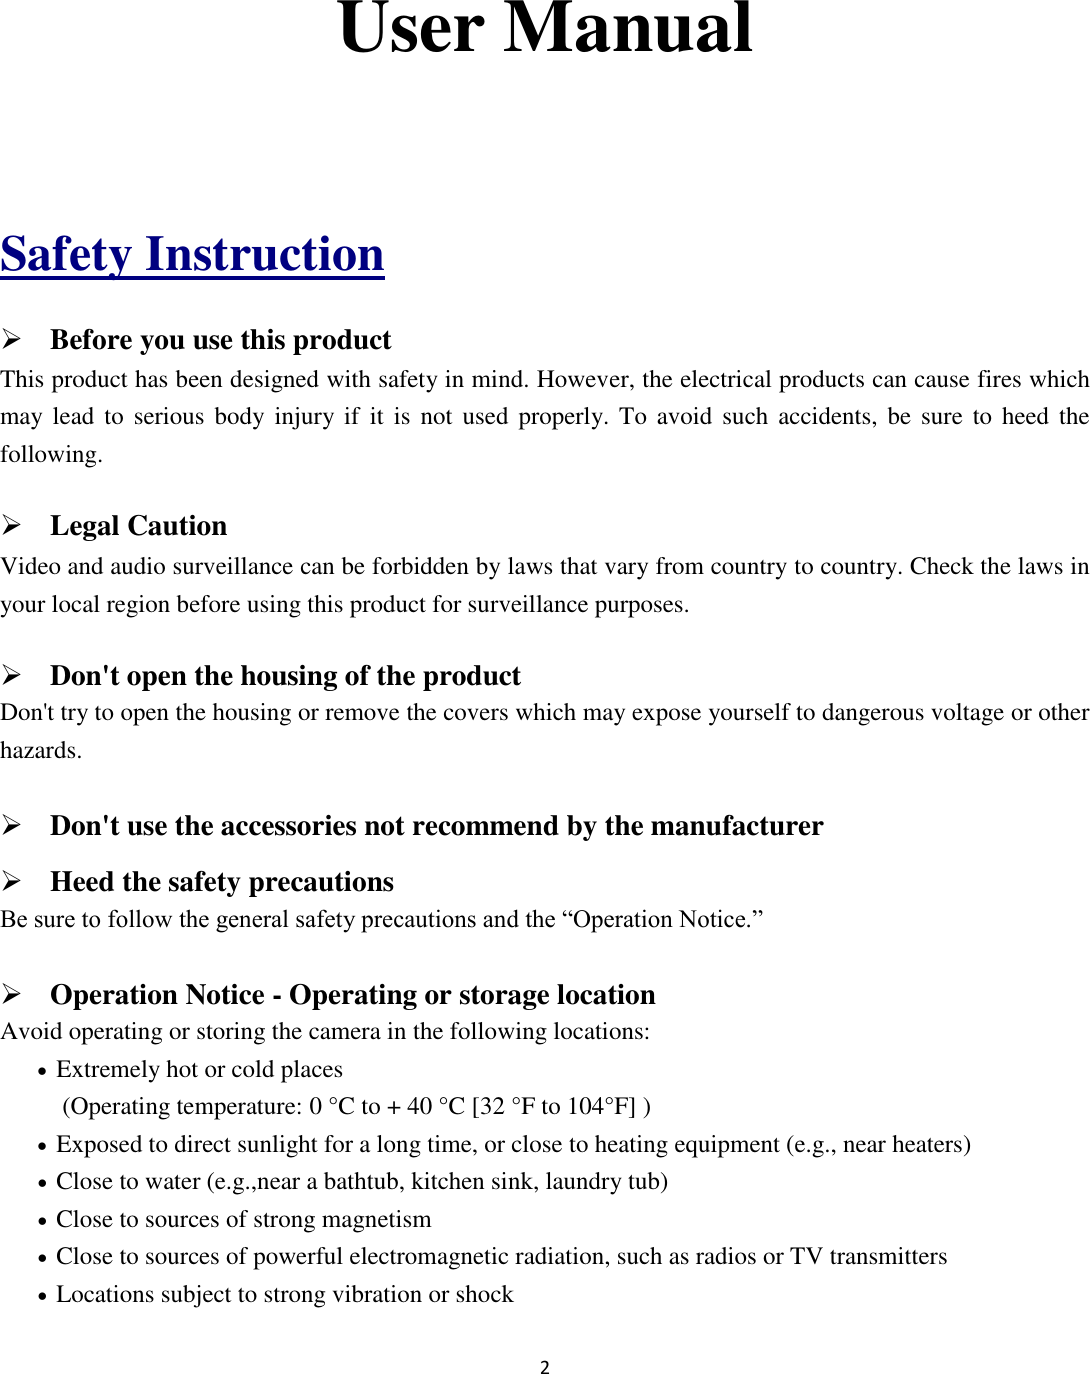 2   User Manual  Safety Instruction  Before you use this product This product has been designed with safety in mind. However, the electrical products can cause fires which may lead  to  serious body  injury if  it  is  not  used properly.  To  avoid such  accidents, be  sure to  heed the following.  Legal Caution Video and audio surveillance can be forbidden by laws that vary from country to country. Check the laws in your local region before using this product for surveillance purposes.    Don&apos;t open the housing of the product Don&apos;t try to open the housing or remove the covers which may expose yourself to dangerous voltage or other hazards.  Don&apos;t use the accessories not recommend by the manufacturer  Heed the safety precautions Be sure to follow the general safety precautions and the “Operation Notice.”  Operation Notice - Operating or storage location Avoid operating or storing the camera in the following locations:  Extremely hot or cold places   (Operating temperature: 0 °C to + 40 °C [32 °F to 104°F] )  Exposed to direct sunlight for a long time, or close to heating equipment (e.g., near heaters)  Close to water (e.g.,near a bathtub, kitchen sink, laundry tub)  Close to sources of strong magnetism    Close to sources of powerful electromagnetic radiation, such as radios or TV transmitters    Locations subject to strong vibration or shock 